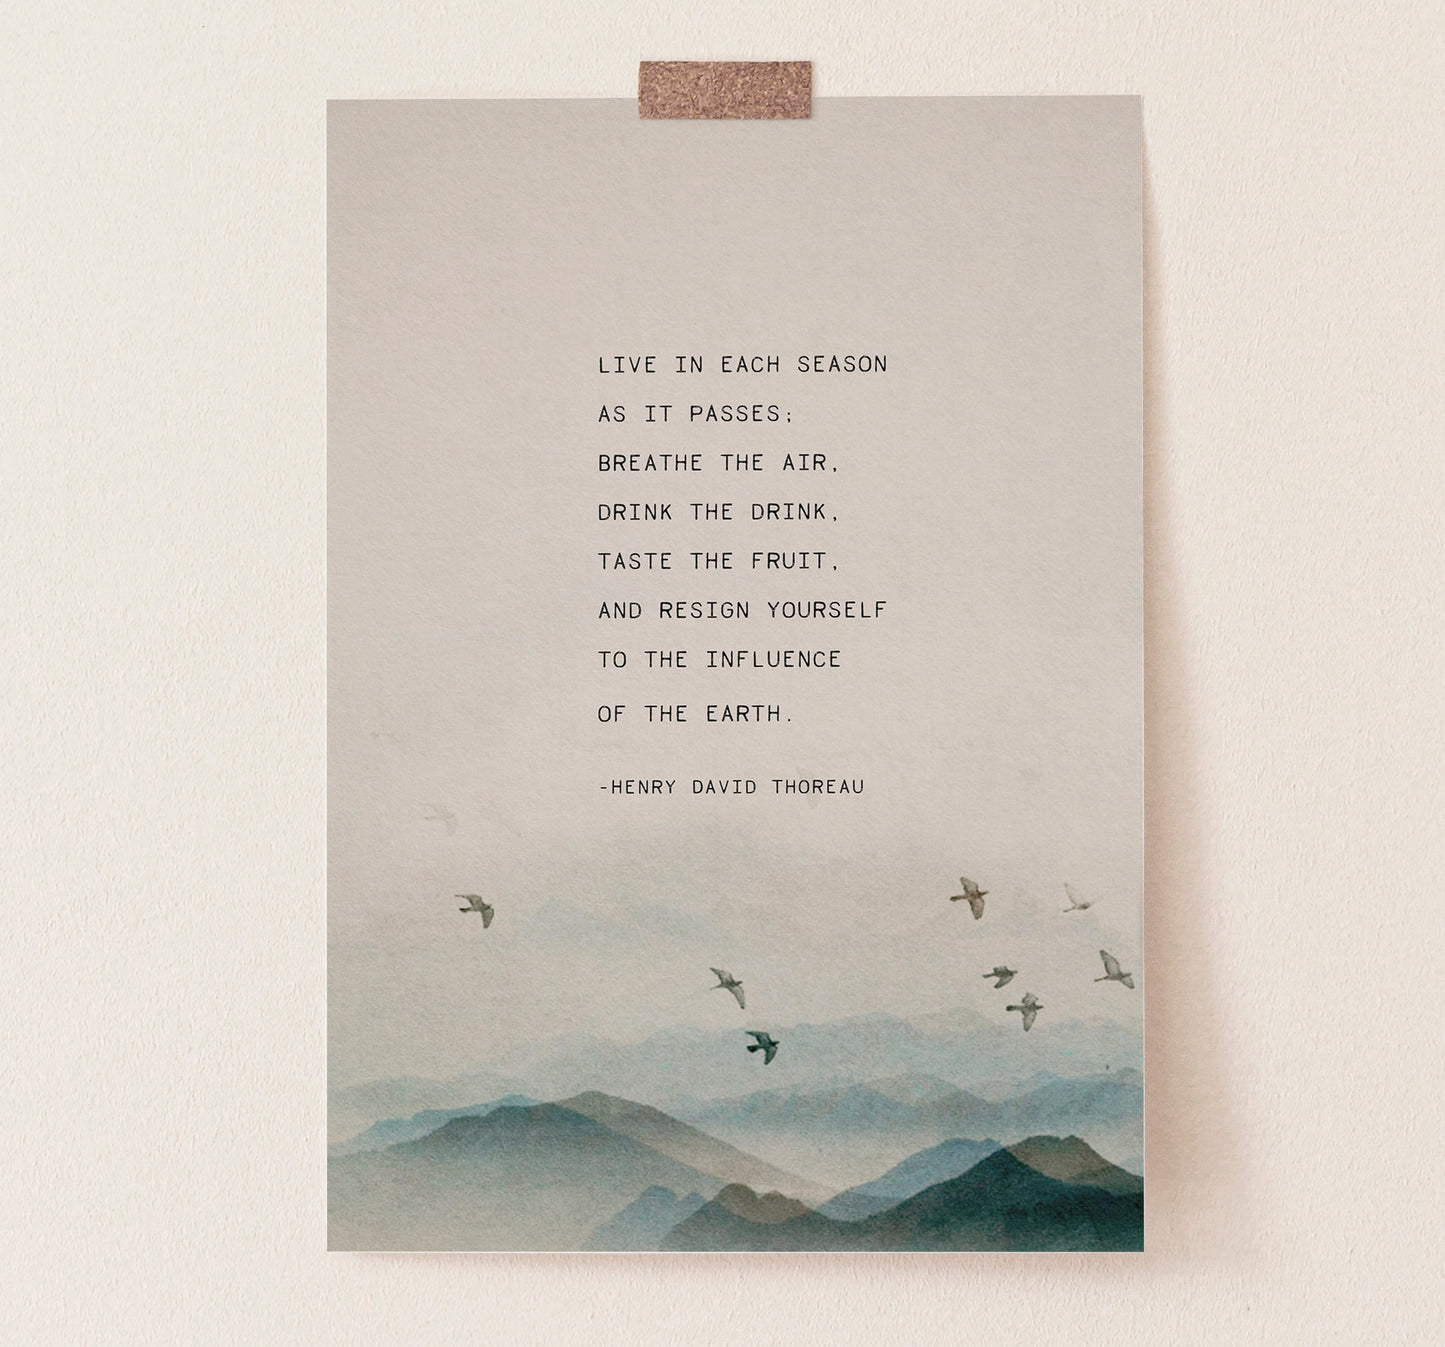 Henry David Thoreau quote from Walden "Live in each season as it passes..." nature wall decor